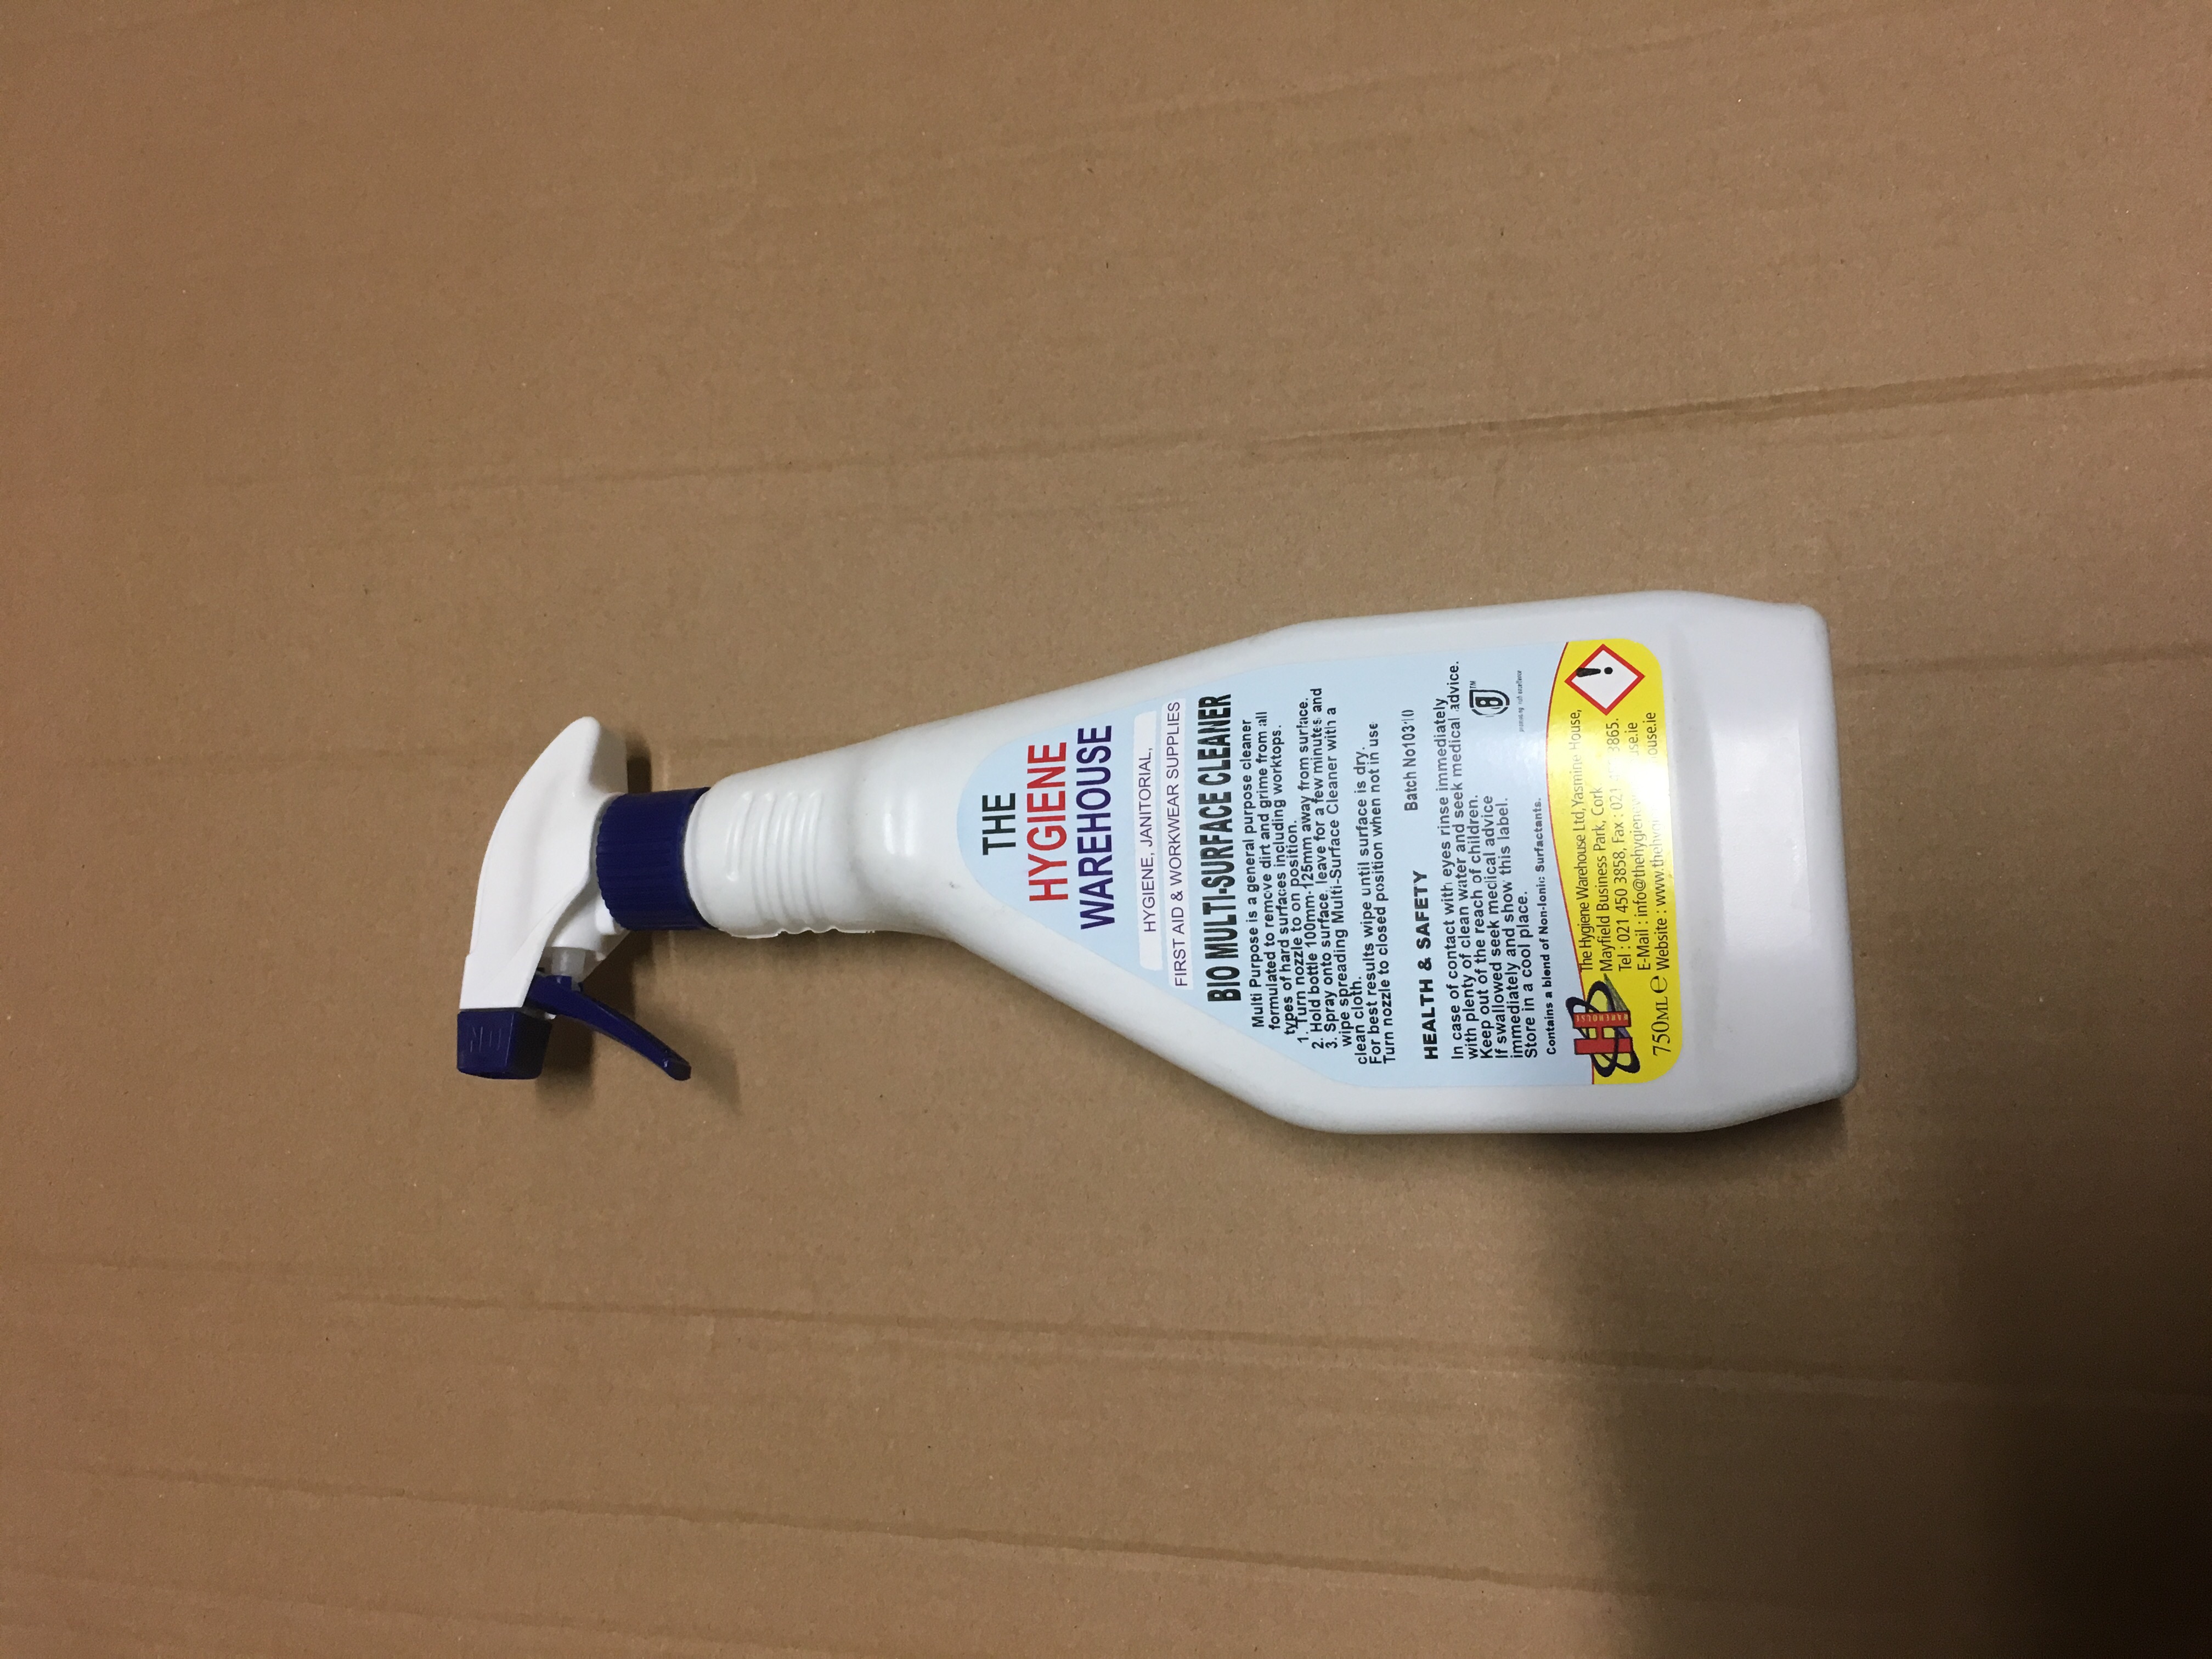 Multi-surface cleaner